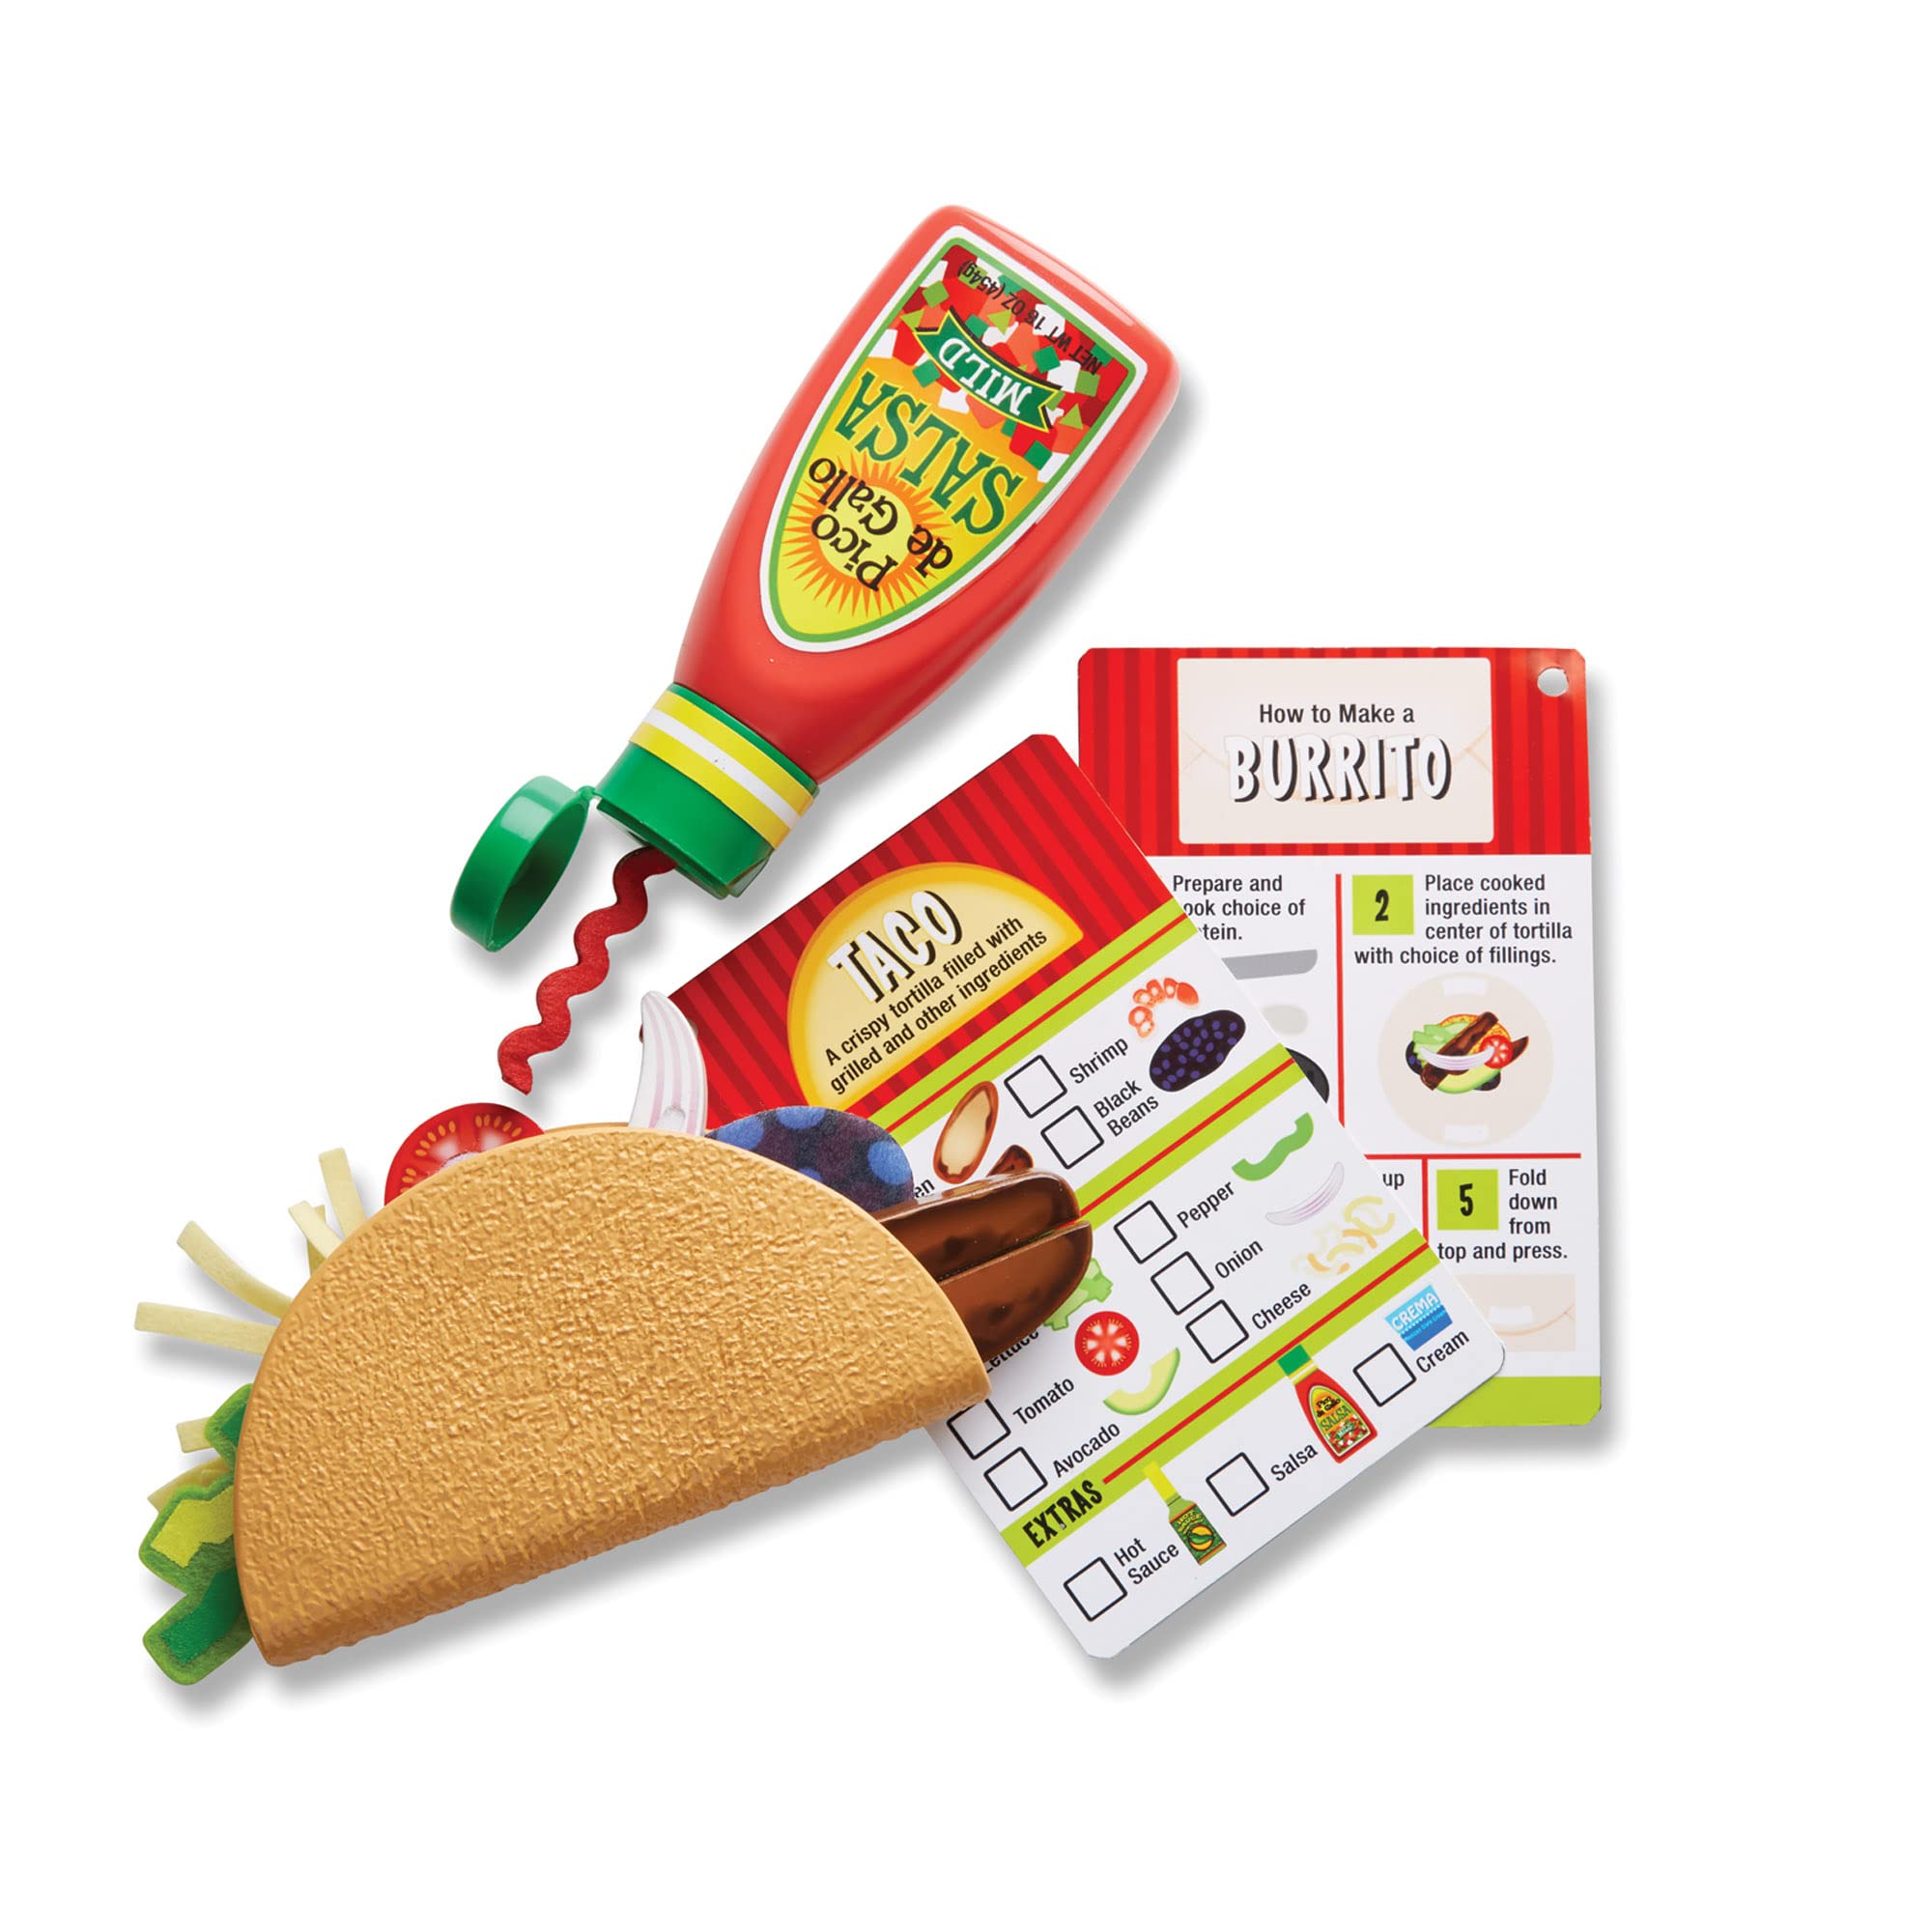 Melissa & Doug Fill & Fold Taco & Tortilla Set, 43 Pieces – Sliceable Wooden Mexican Play Food, Skillet, and More - Pretend Play Kitchen Toy For Kids Ages 3+